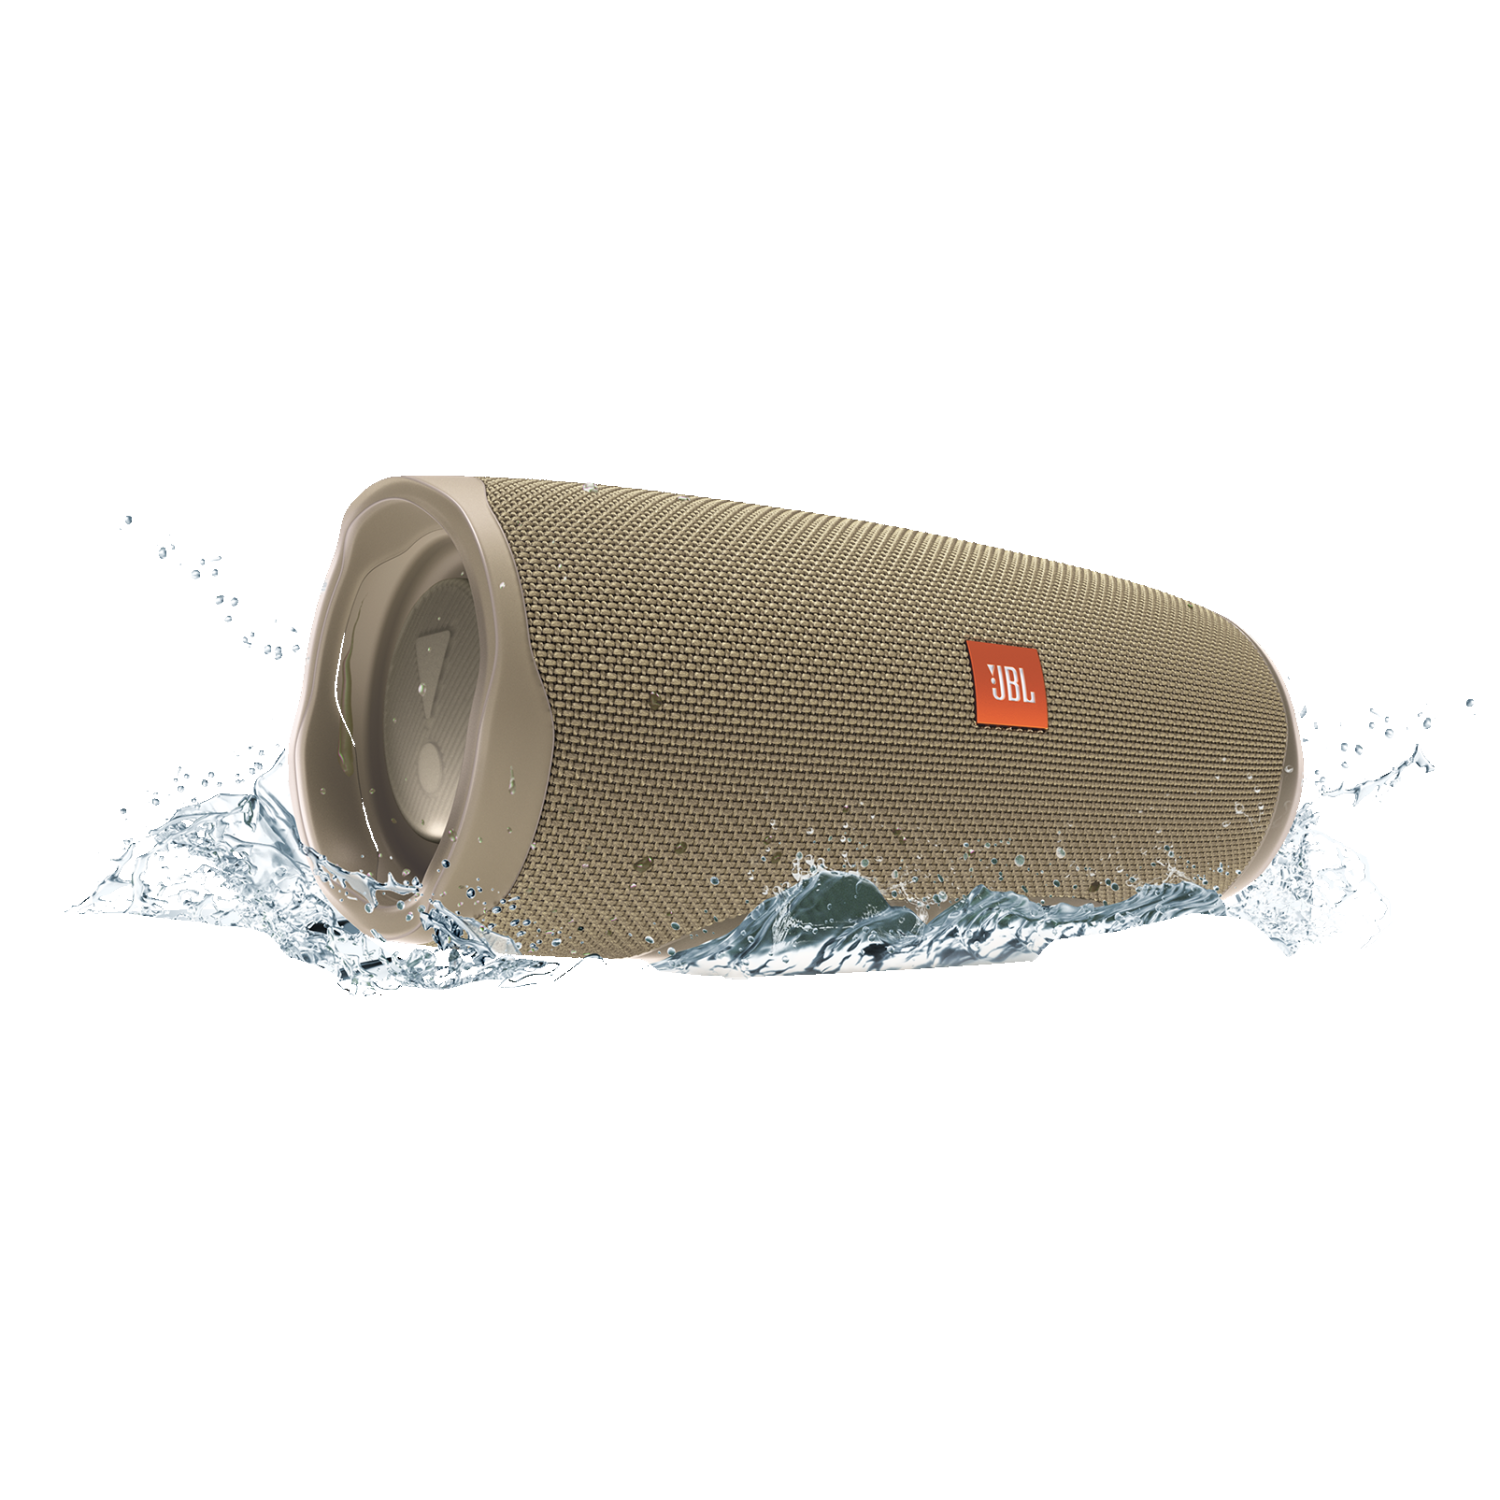 JBL Charge 4 Portable Bluetooth speaker (Sand) (Open Box)